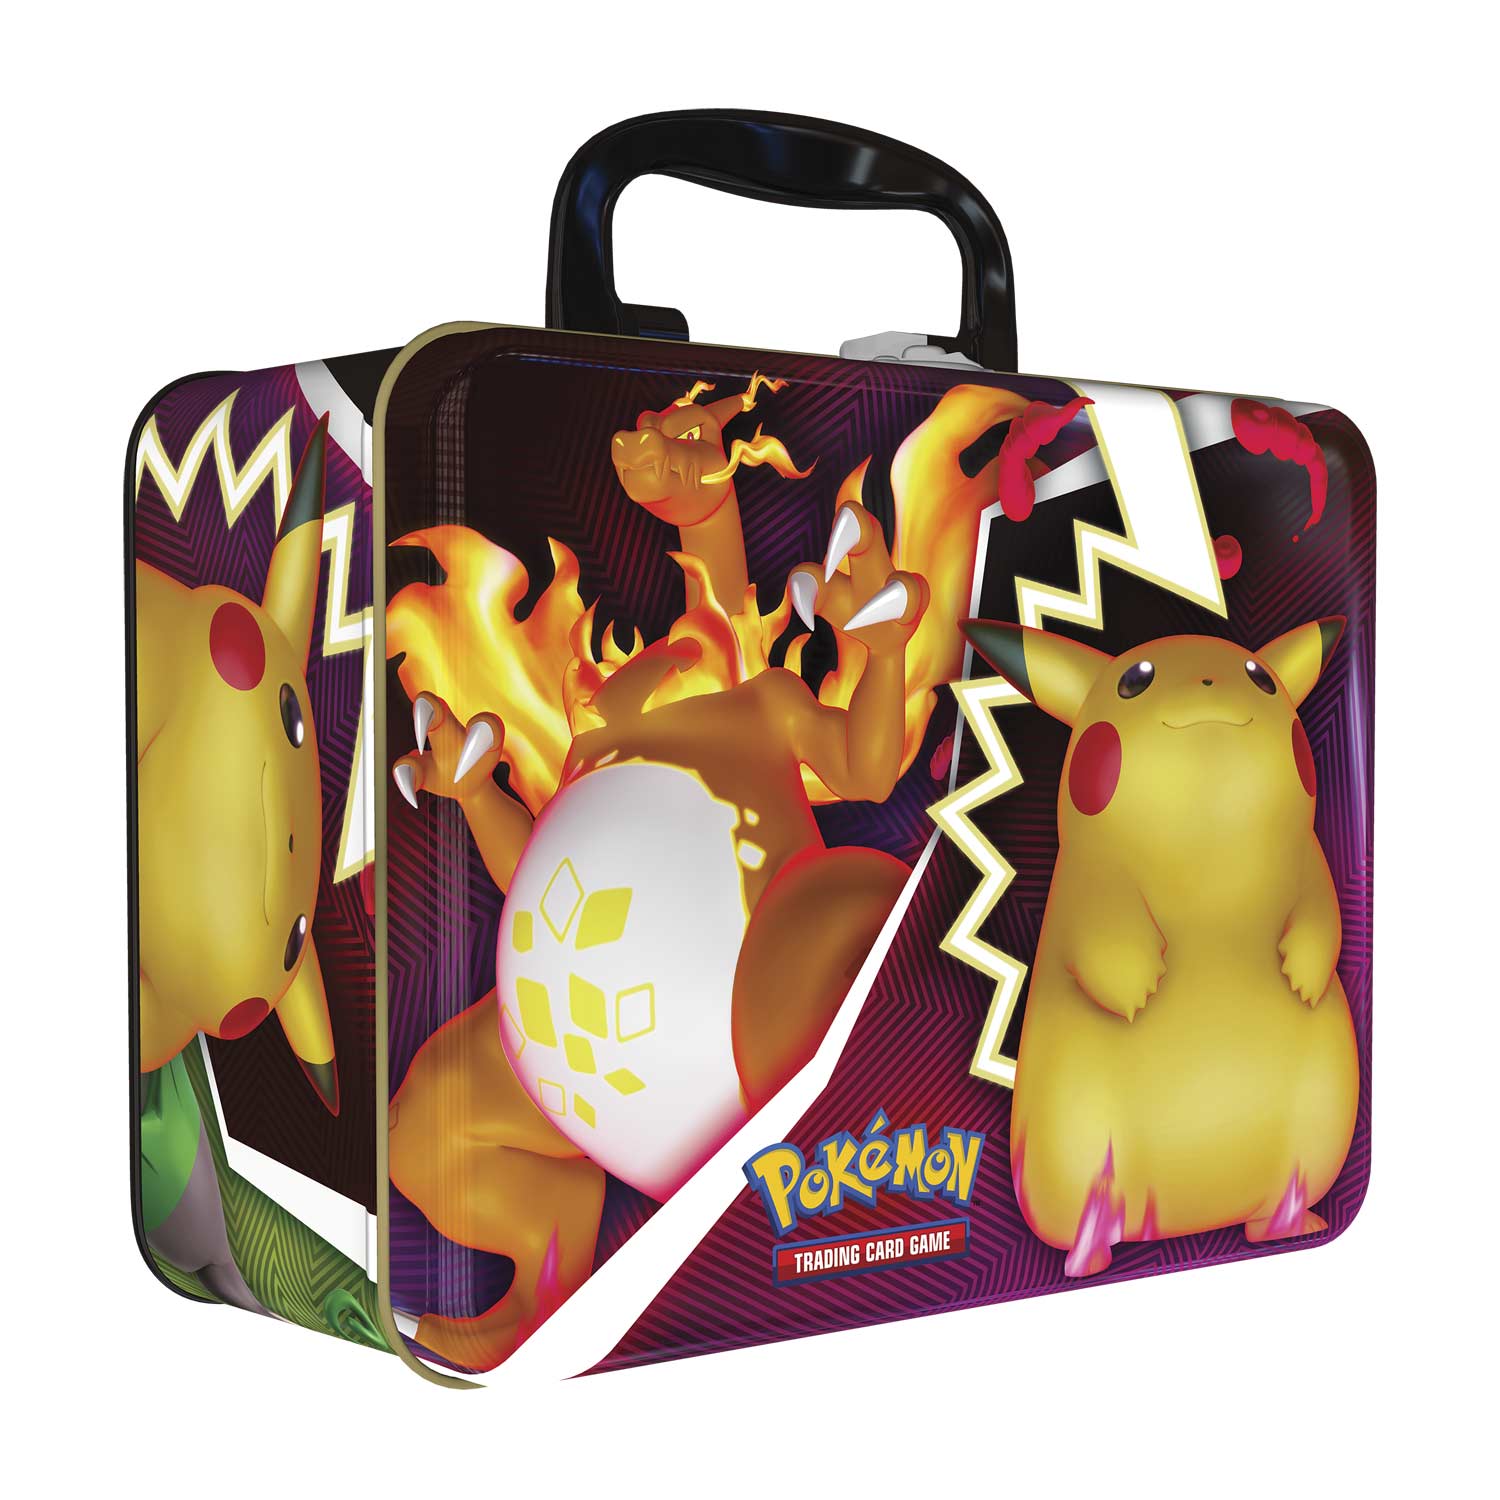 Pokemon Pikachu Deluxe Soft Lunchbox - Pokemon Singles » Pokemon Pins,  Badges, & Misc items - Collector's Cache LLC